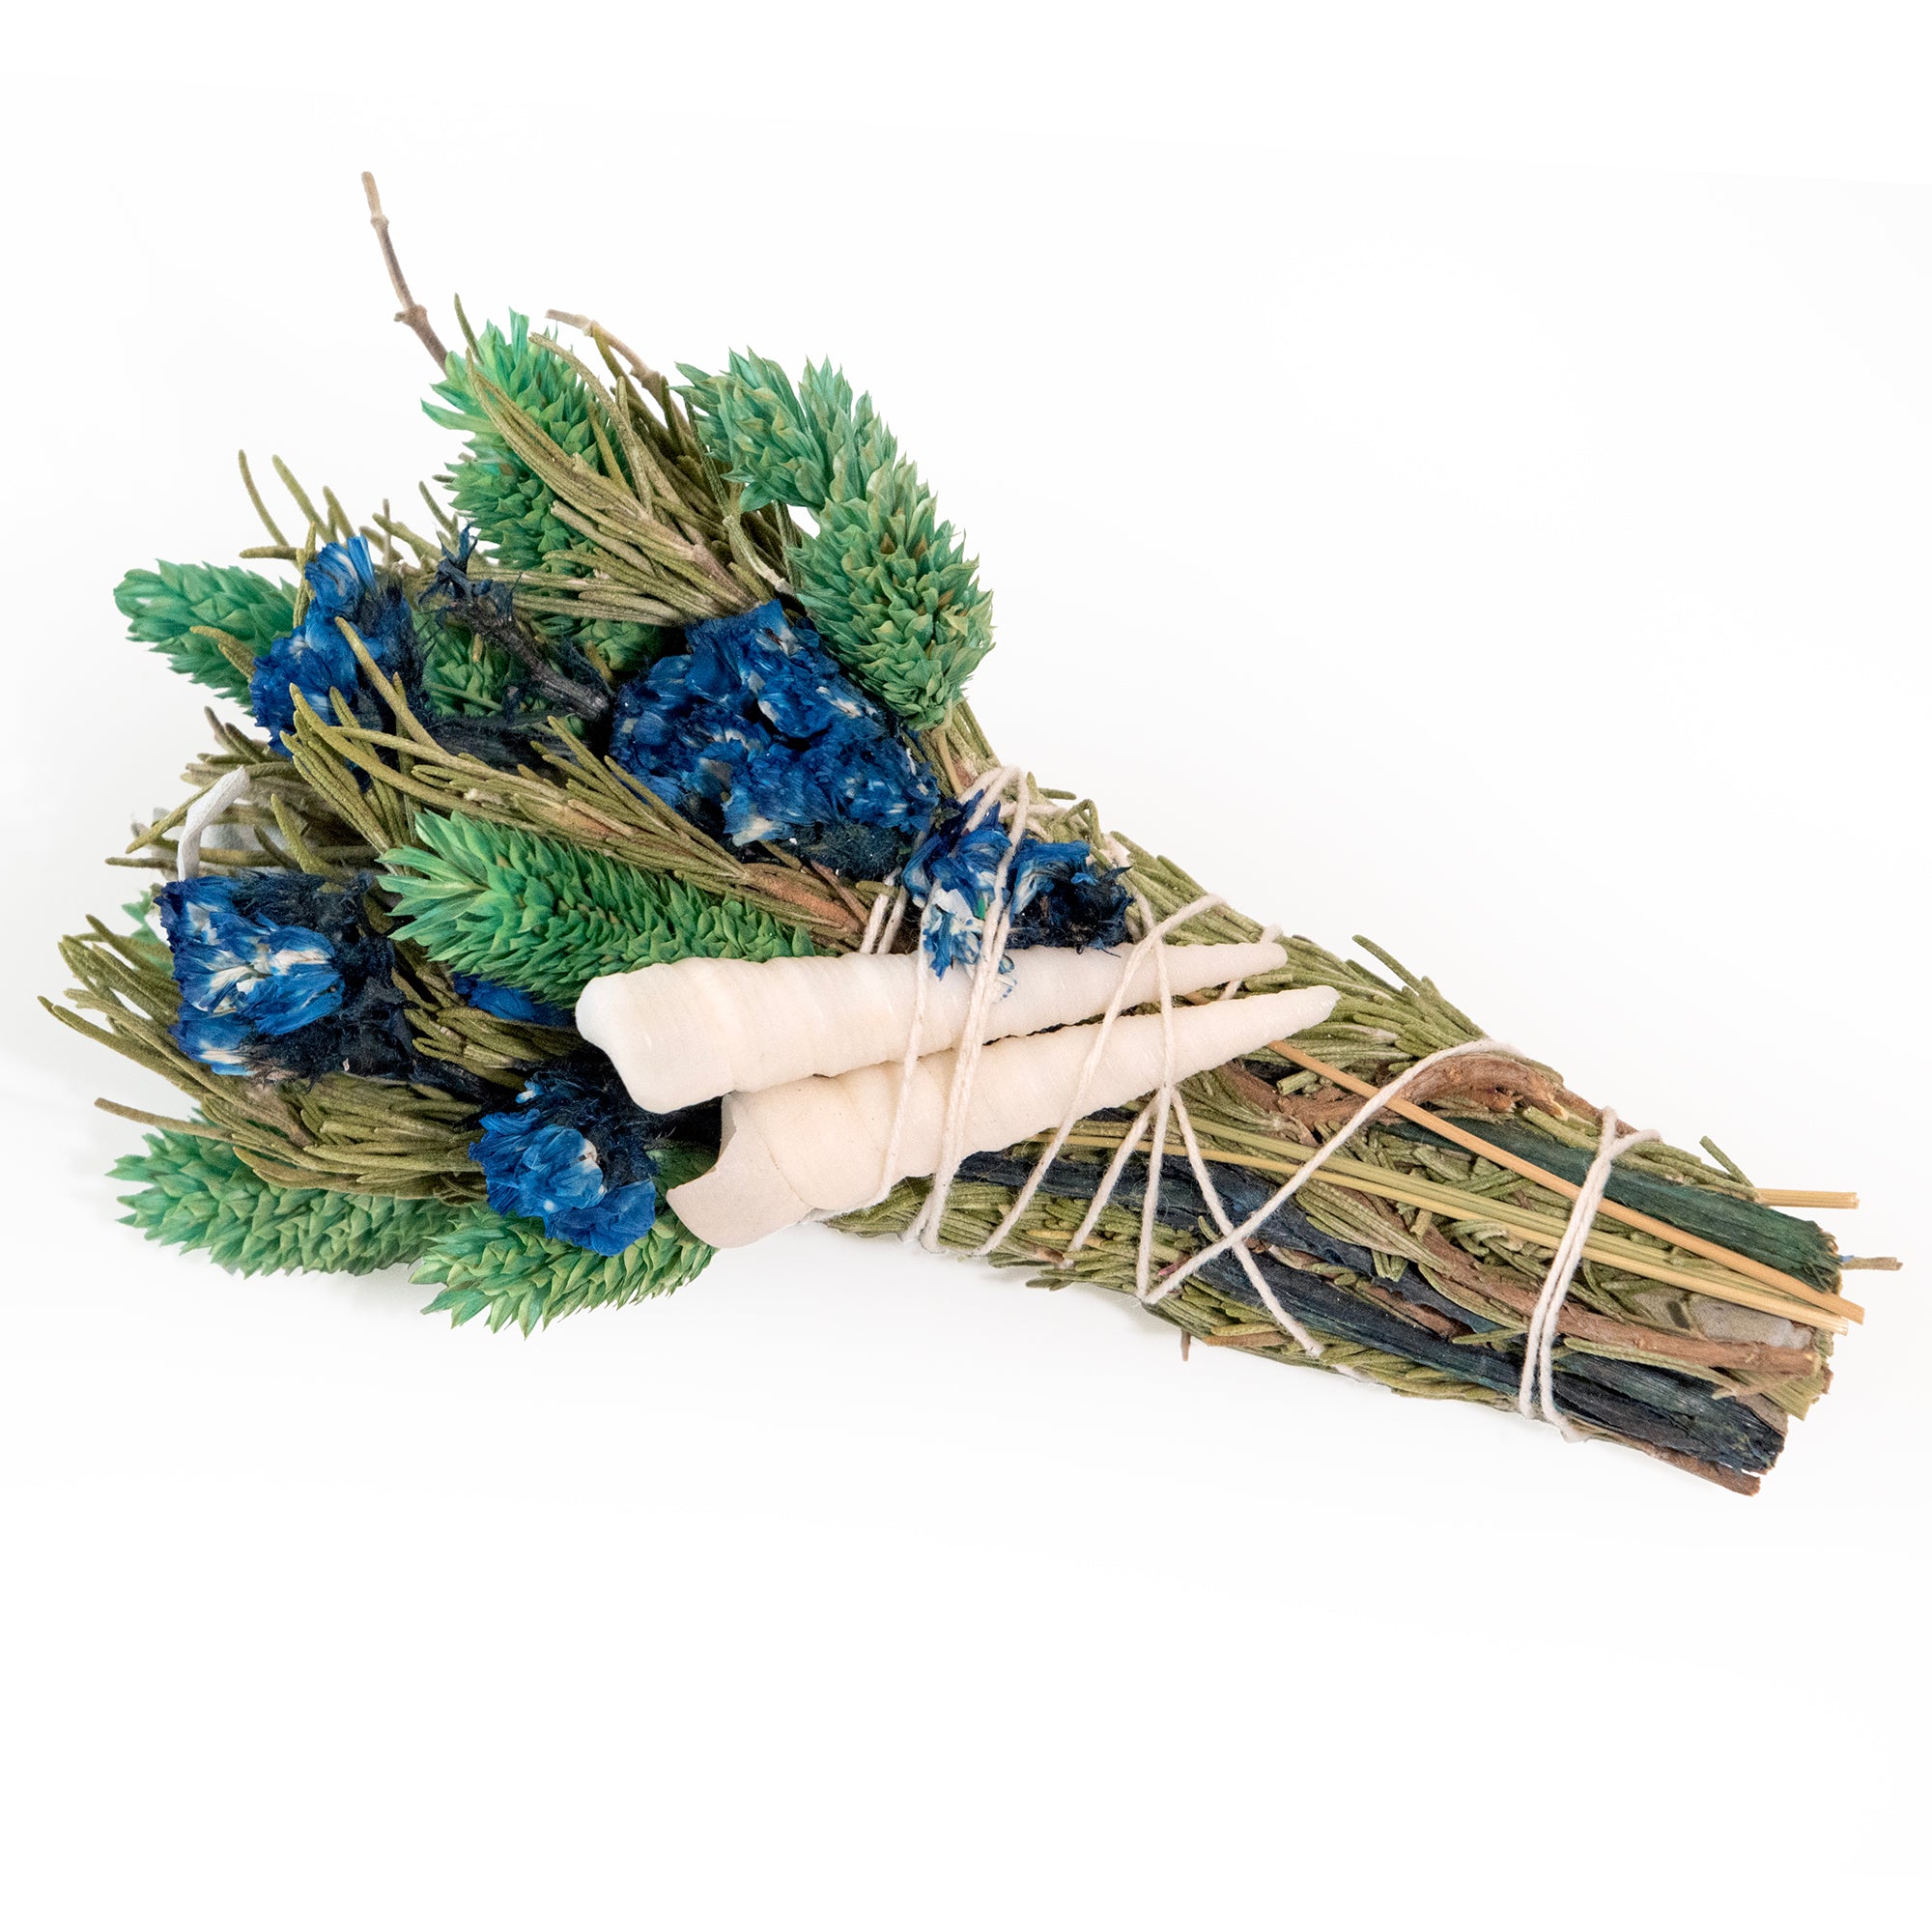 6" Blue & Green Floral & Greenery Smudge Wand with Shells